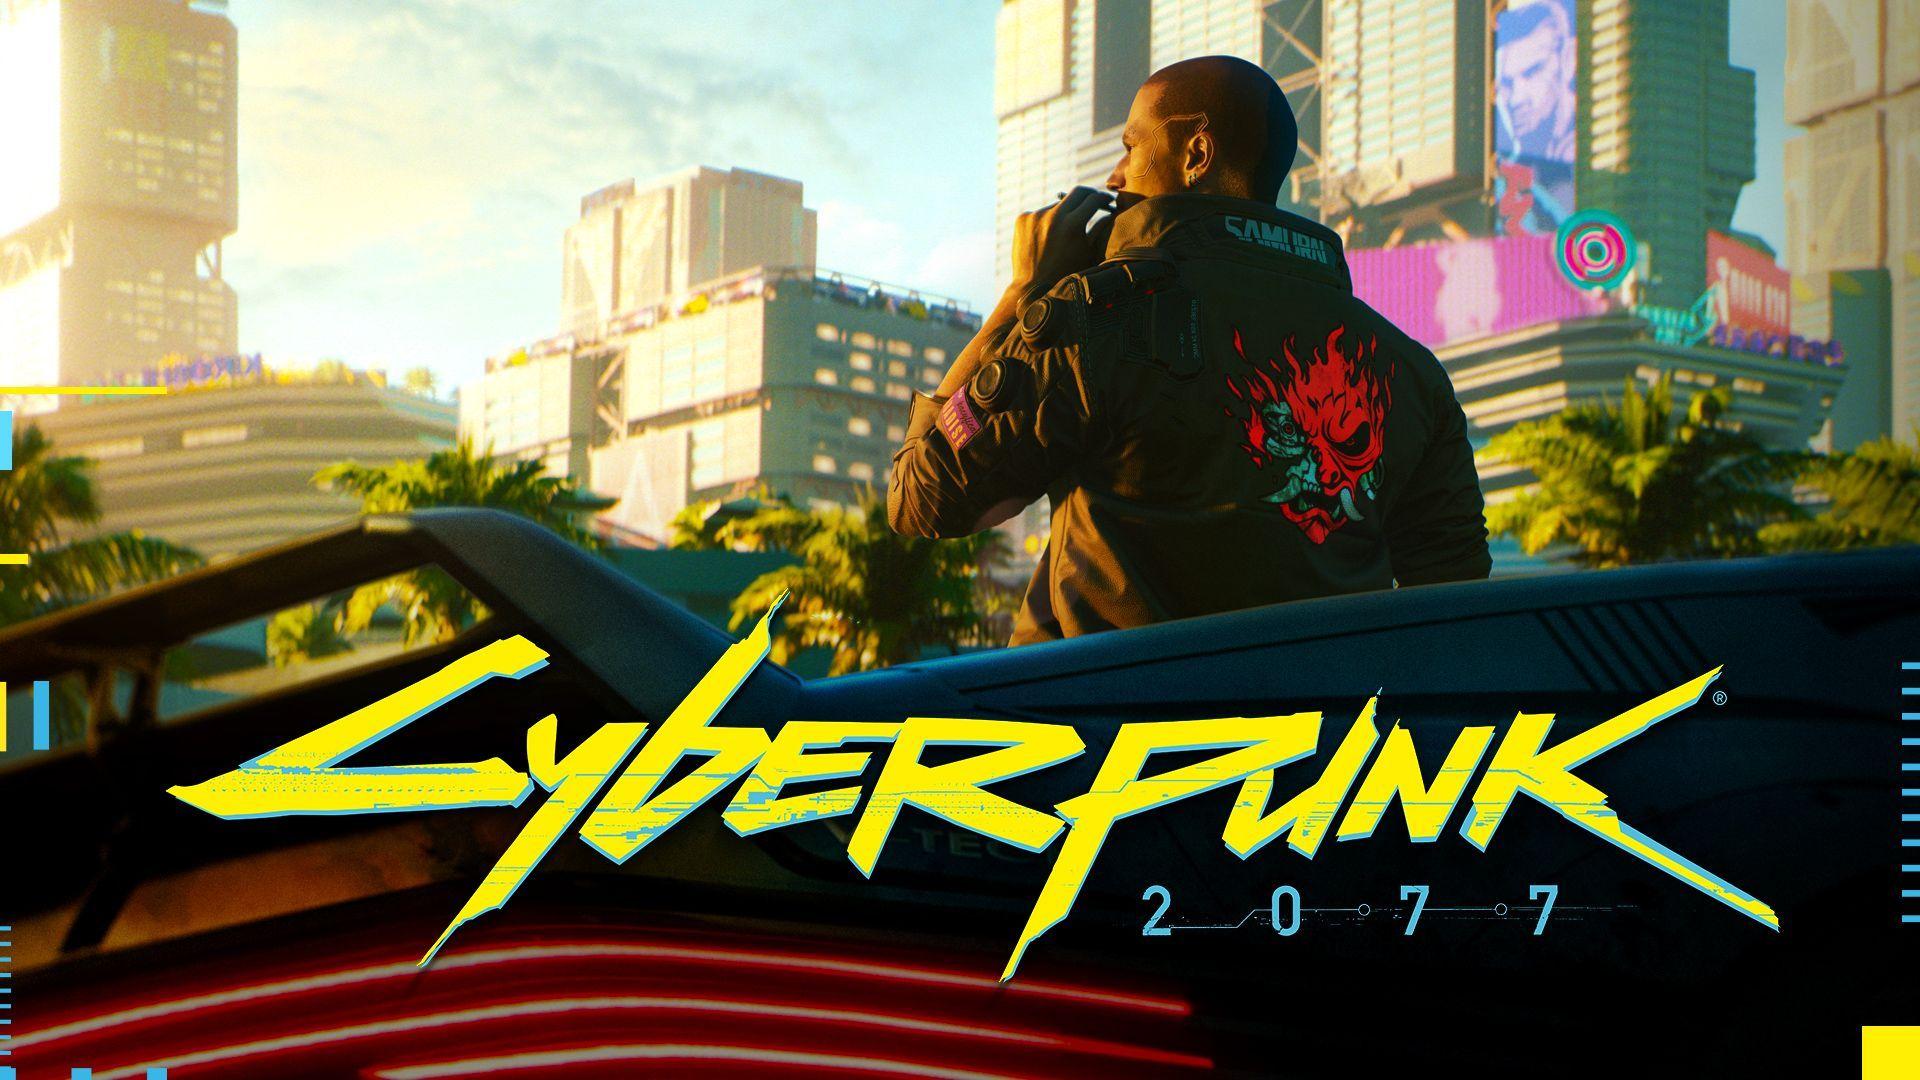 Cyberpunk 2077 is a Bold Departure Unlike Anything We've Seen